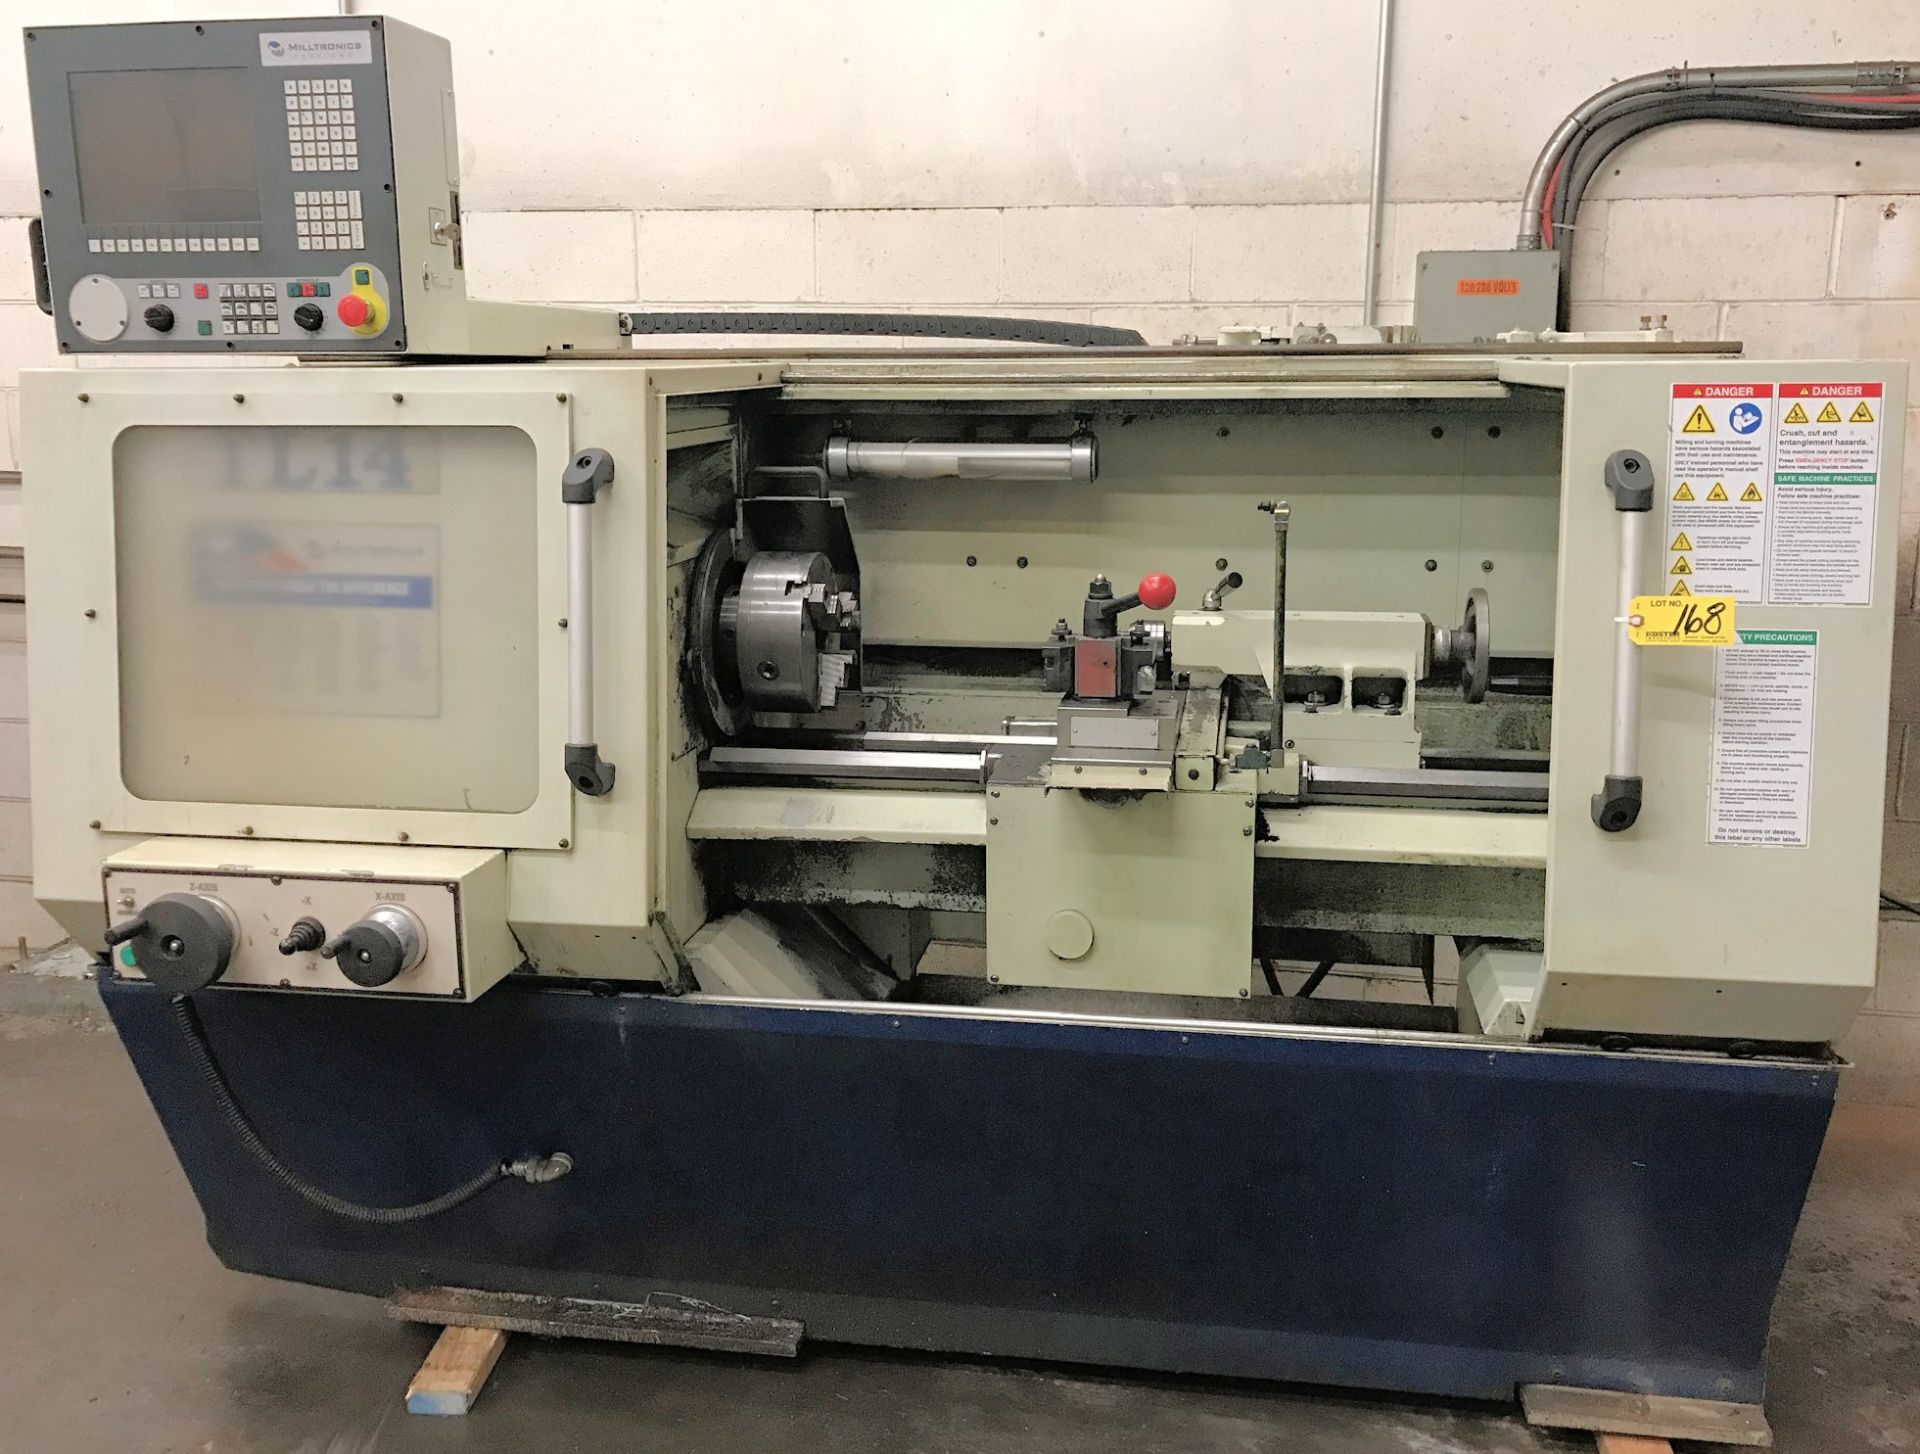 MILLTRONICS TL14 CNC LATHE, 14" SWING OVER BED, 36" BETWEEN CENTERS, 100-3,000 RPM, 12-HP, TOOL